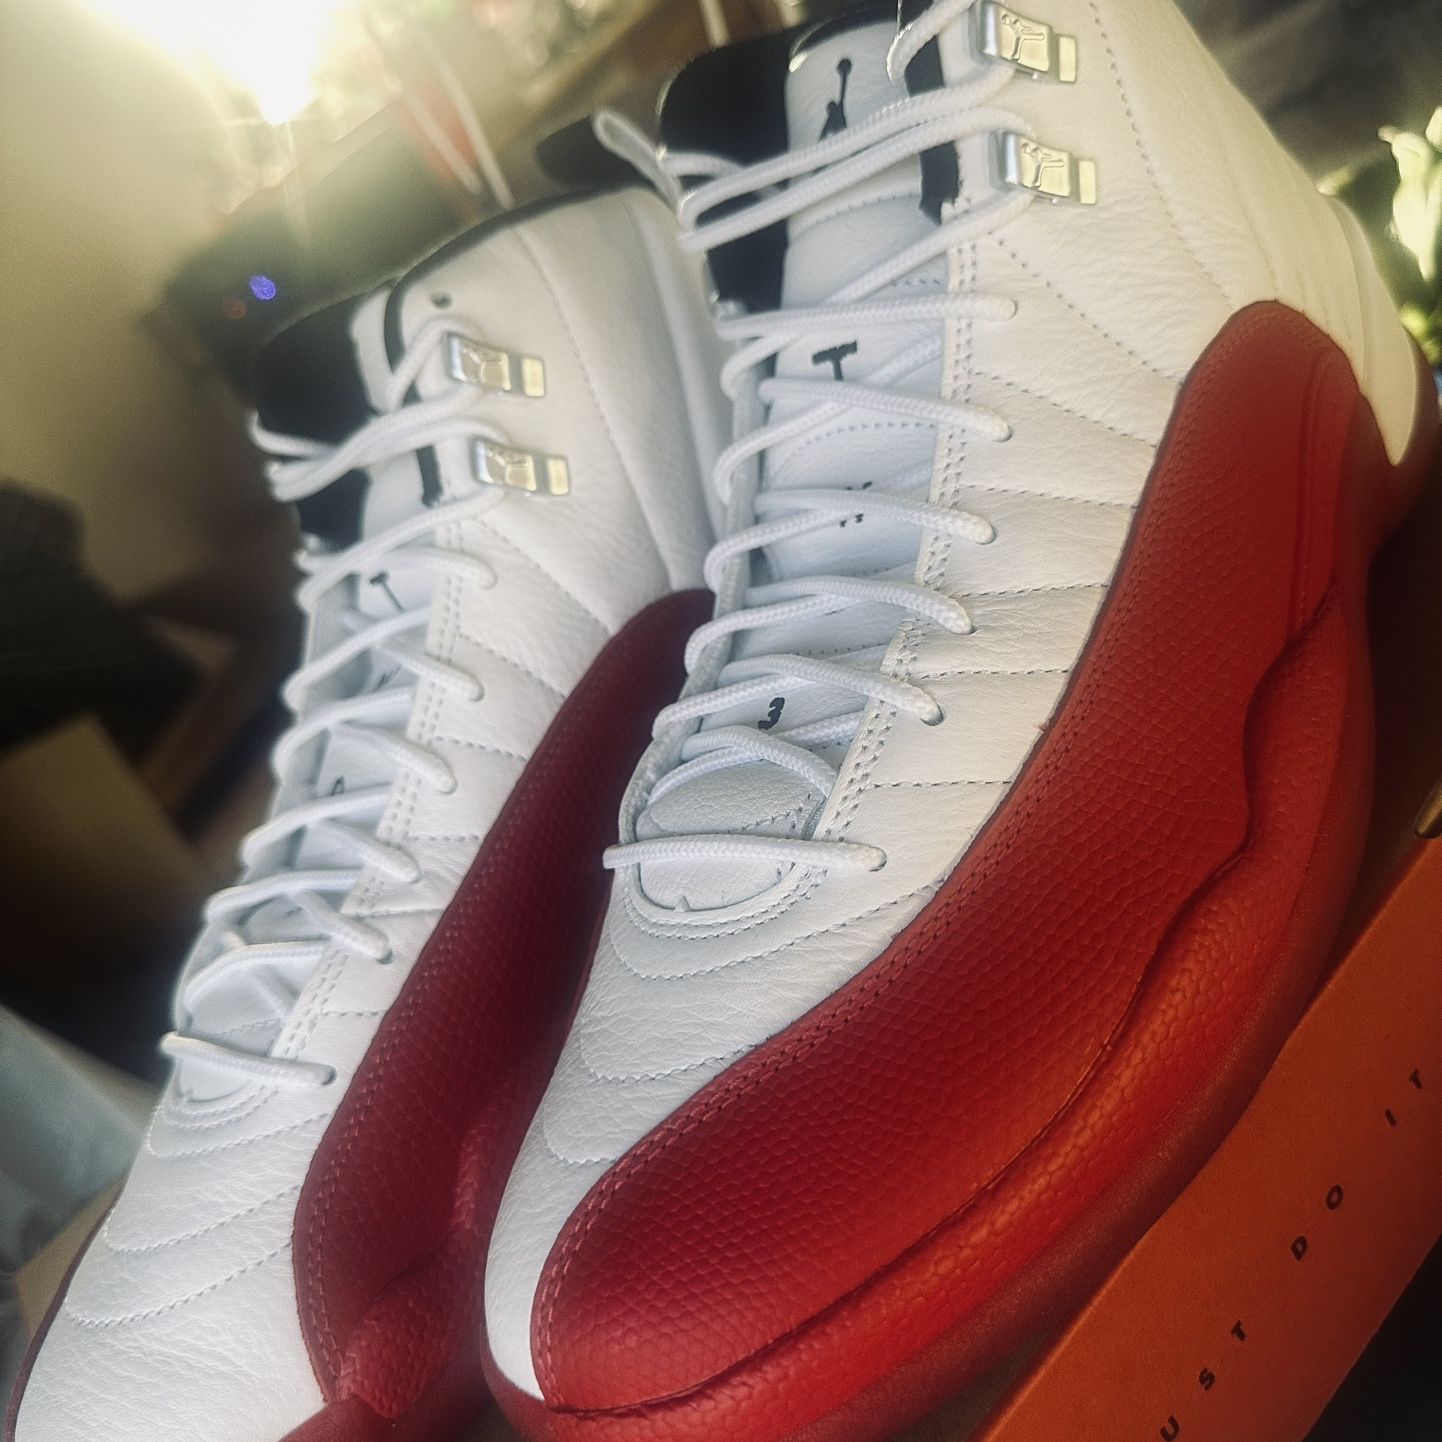 12s For Sale (Brand New)